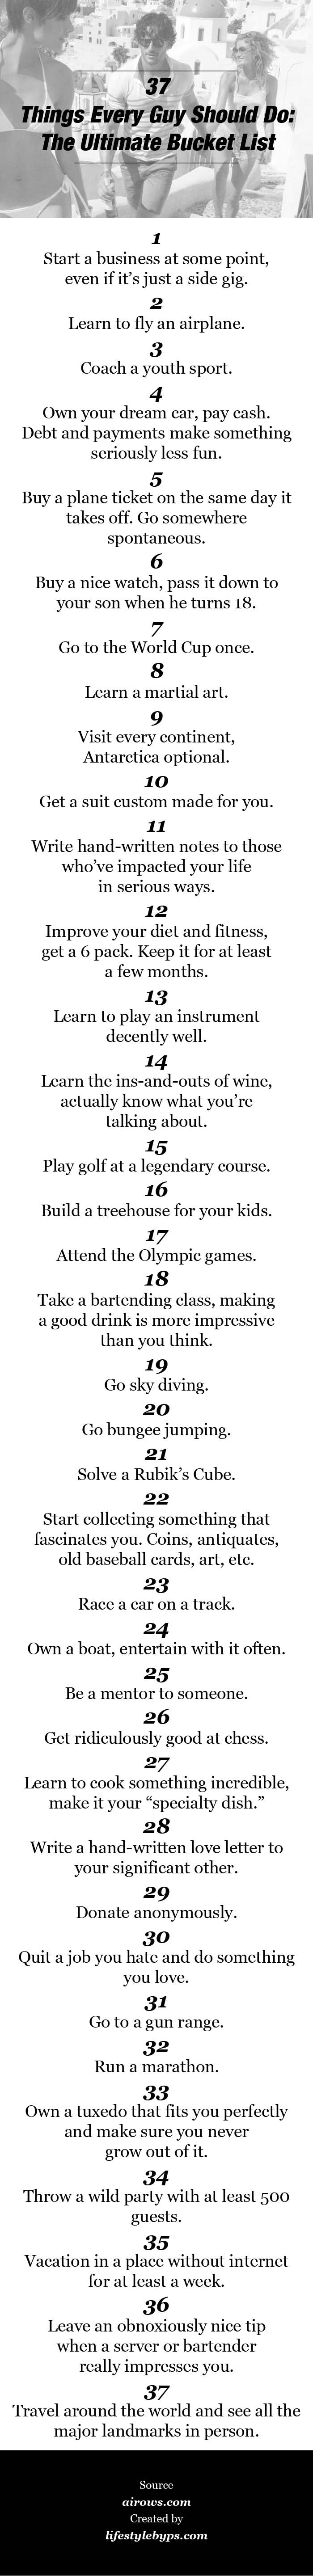 37 Things Every Man Should Do: The Ultimate Bucket List